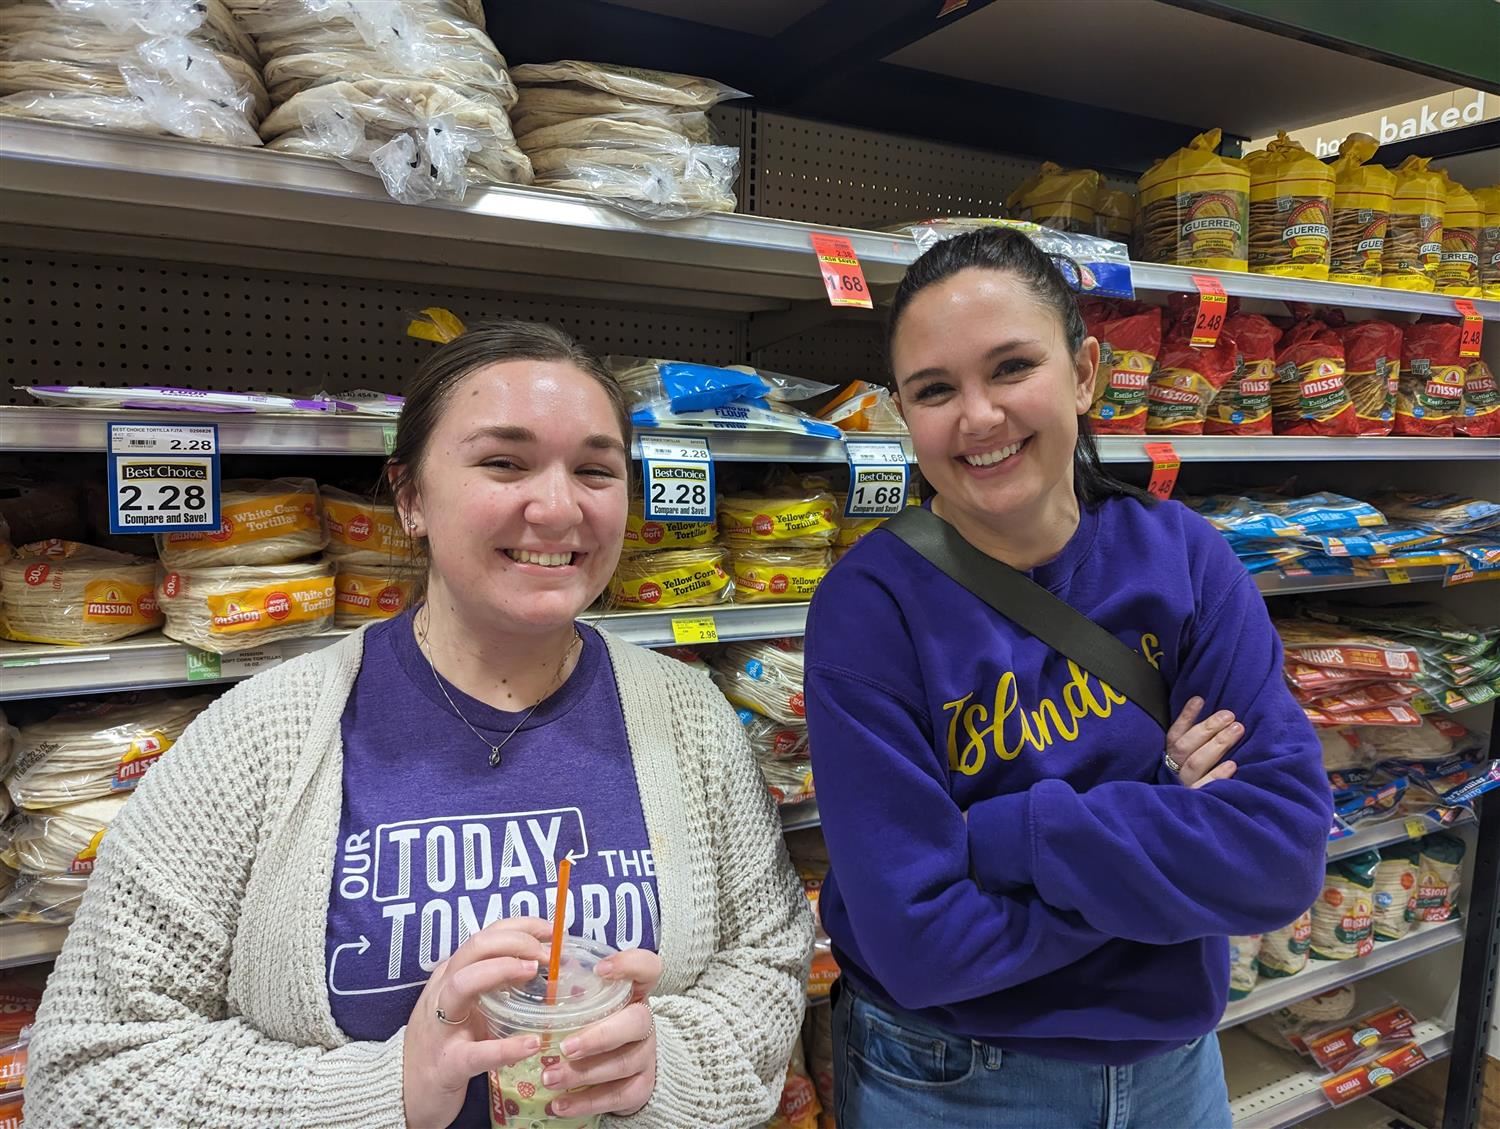 Two smiling Wasmer Elementary teachers helping families in the bread aisle at Super Saver.